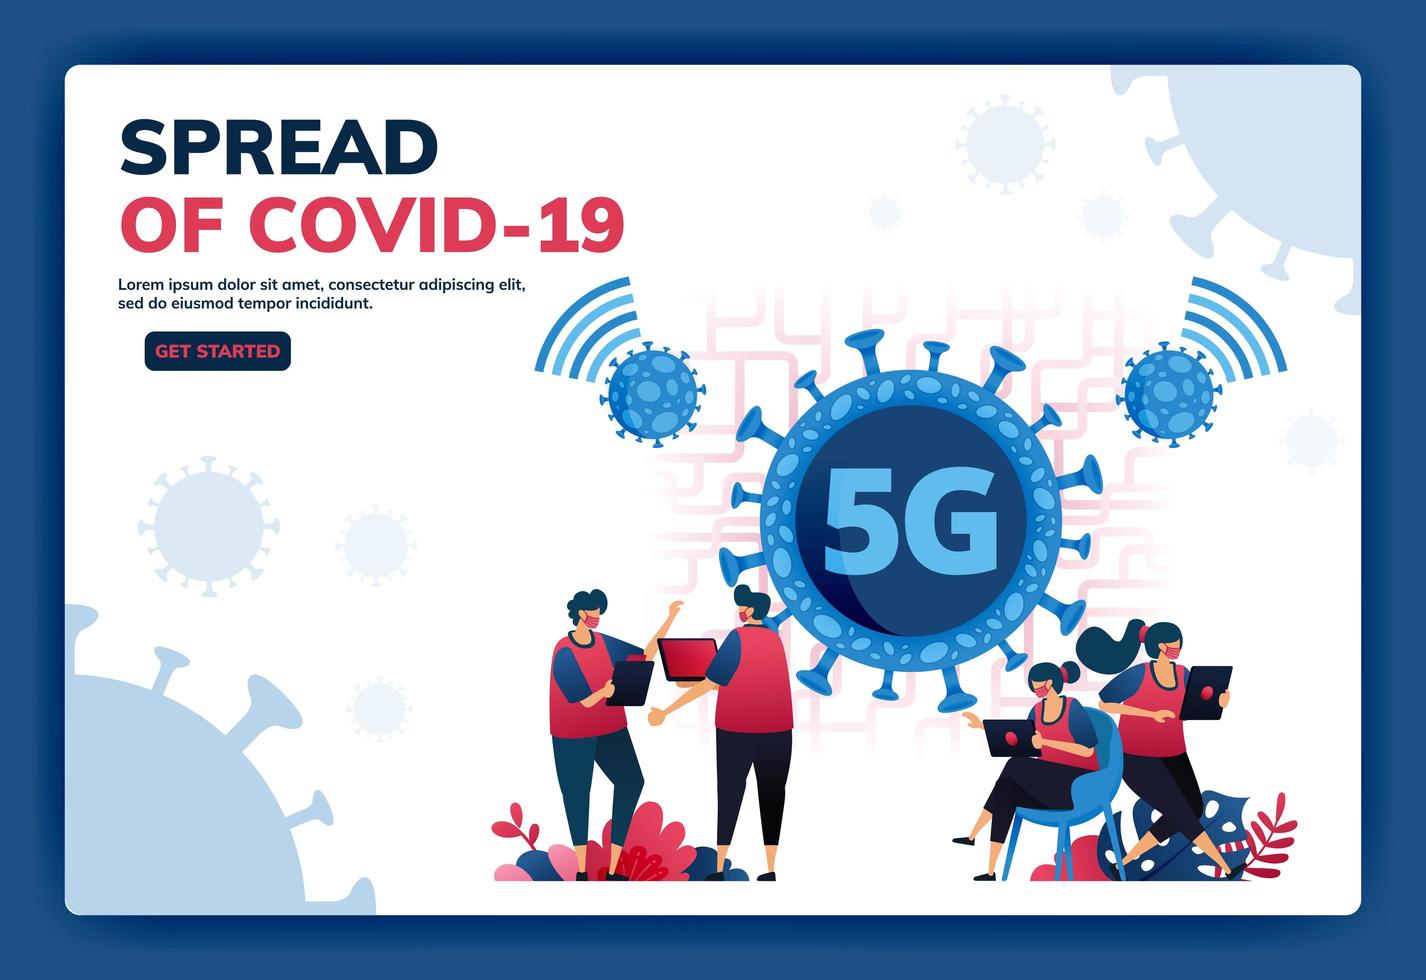 Landing page vector illustration of 5g internet connection to support activities during the covid-19 virus pandemic. Symbols and icons of viruses, networks, wifi, connections. Web, website, banner